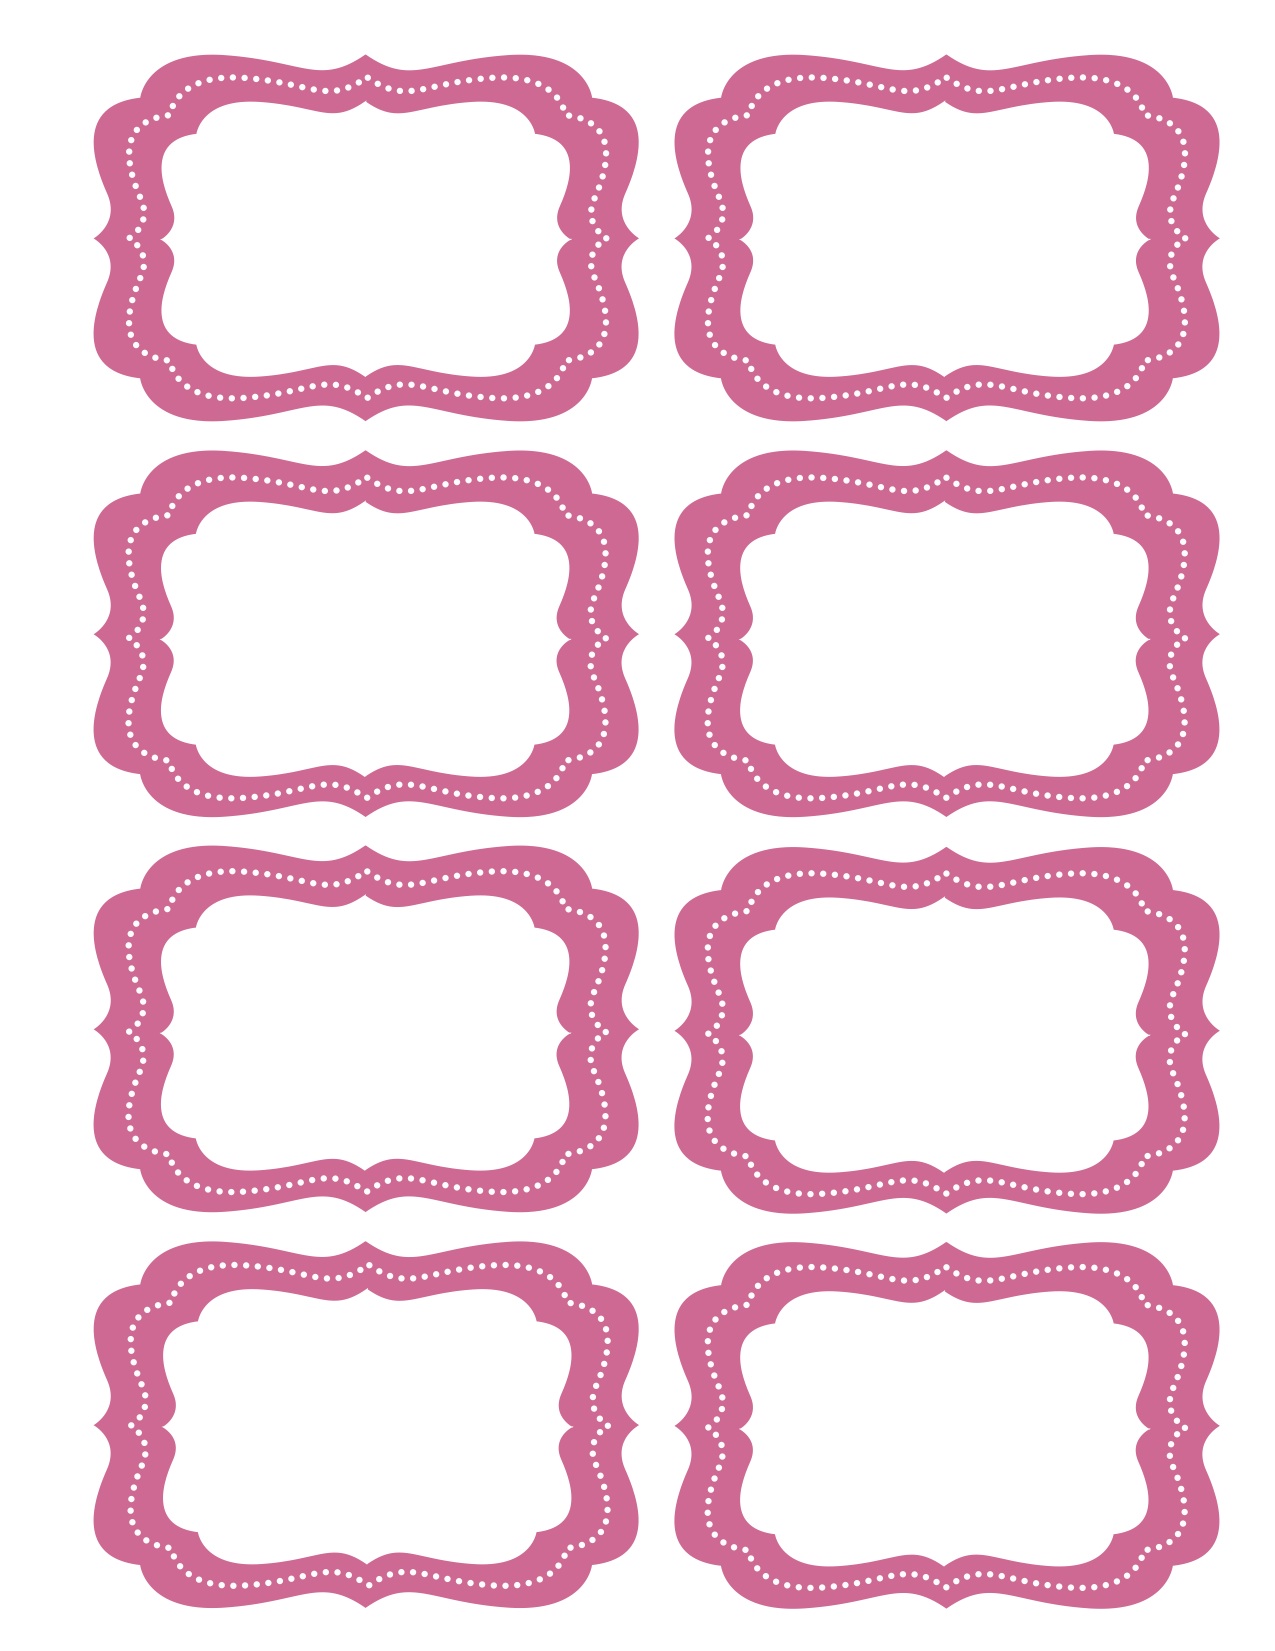 Candy Labels Blank Free Images at vector clip art online